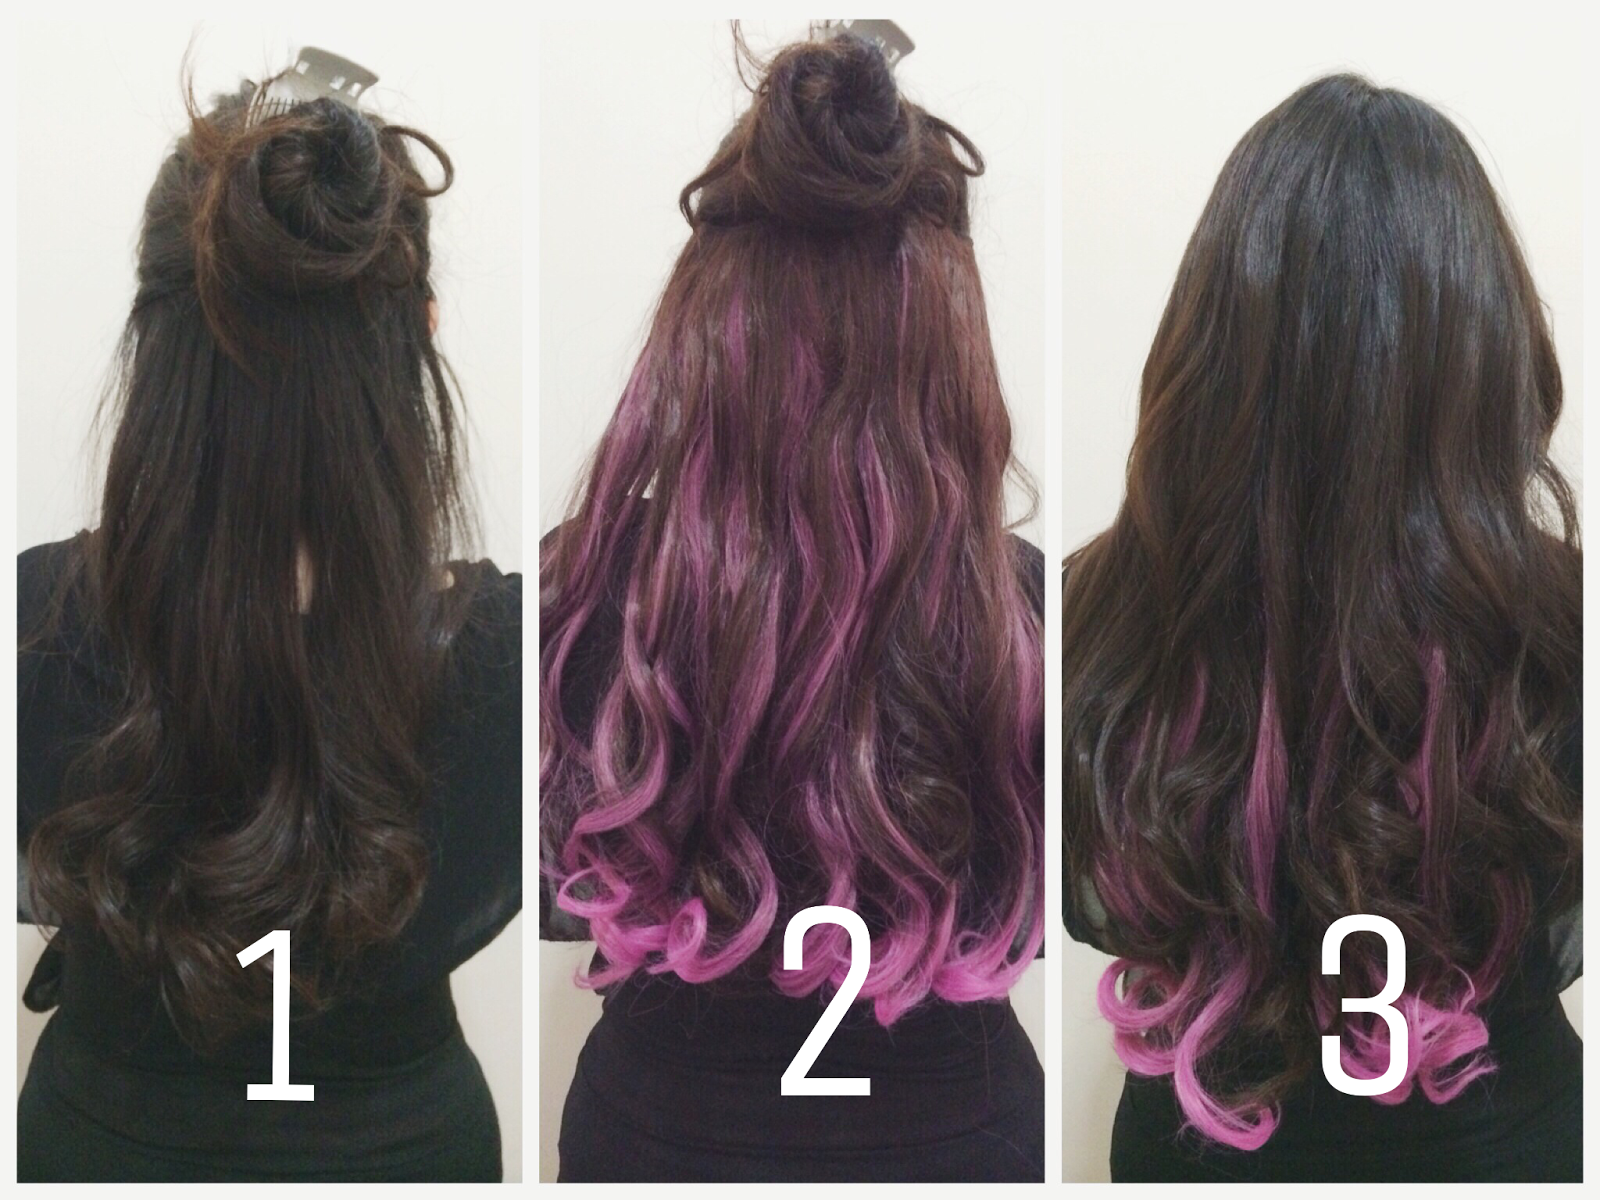  warna  rambut  ombre  warna  ombre  rambut  blue and black 25 